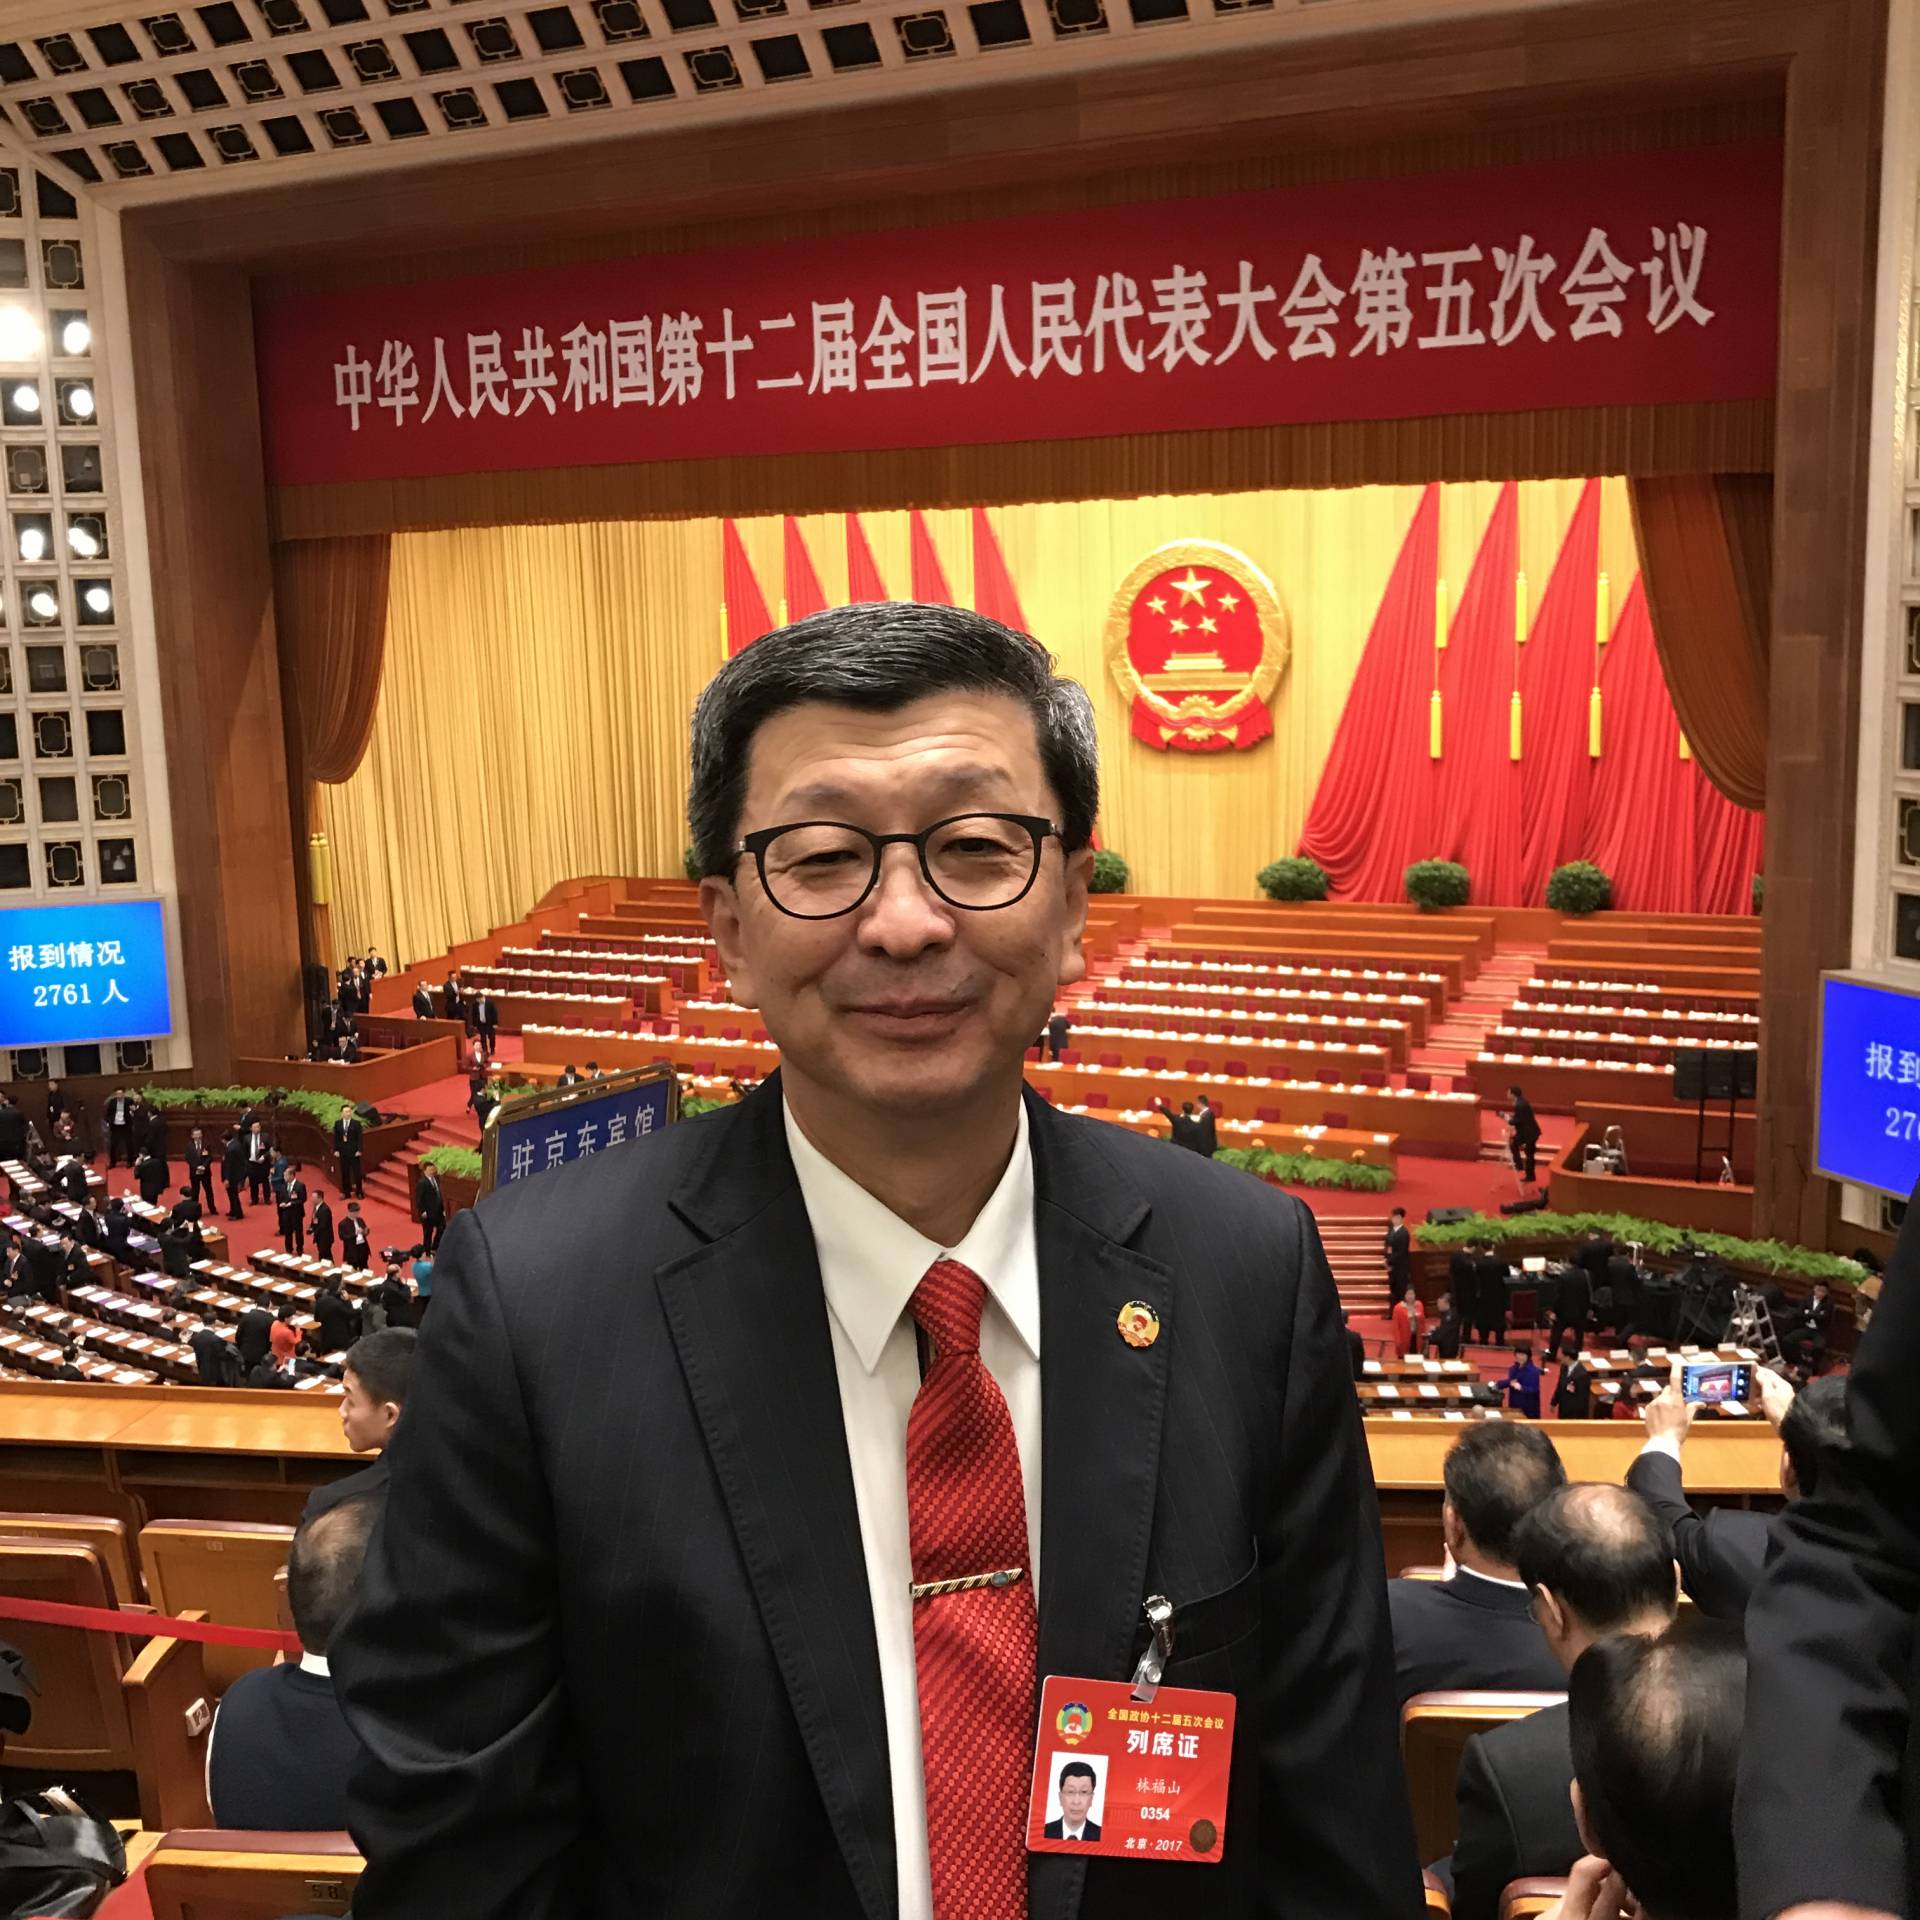 Tan Sri Lim Hock San attending 5th Session of the National Committee of Chinese People’s Political Consultative Conference held on 5-13 March 2017.